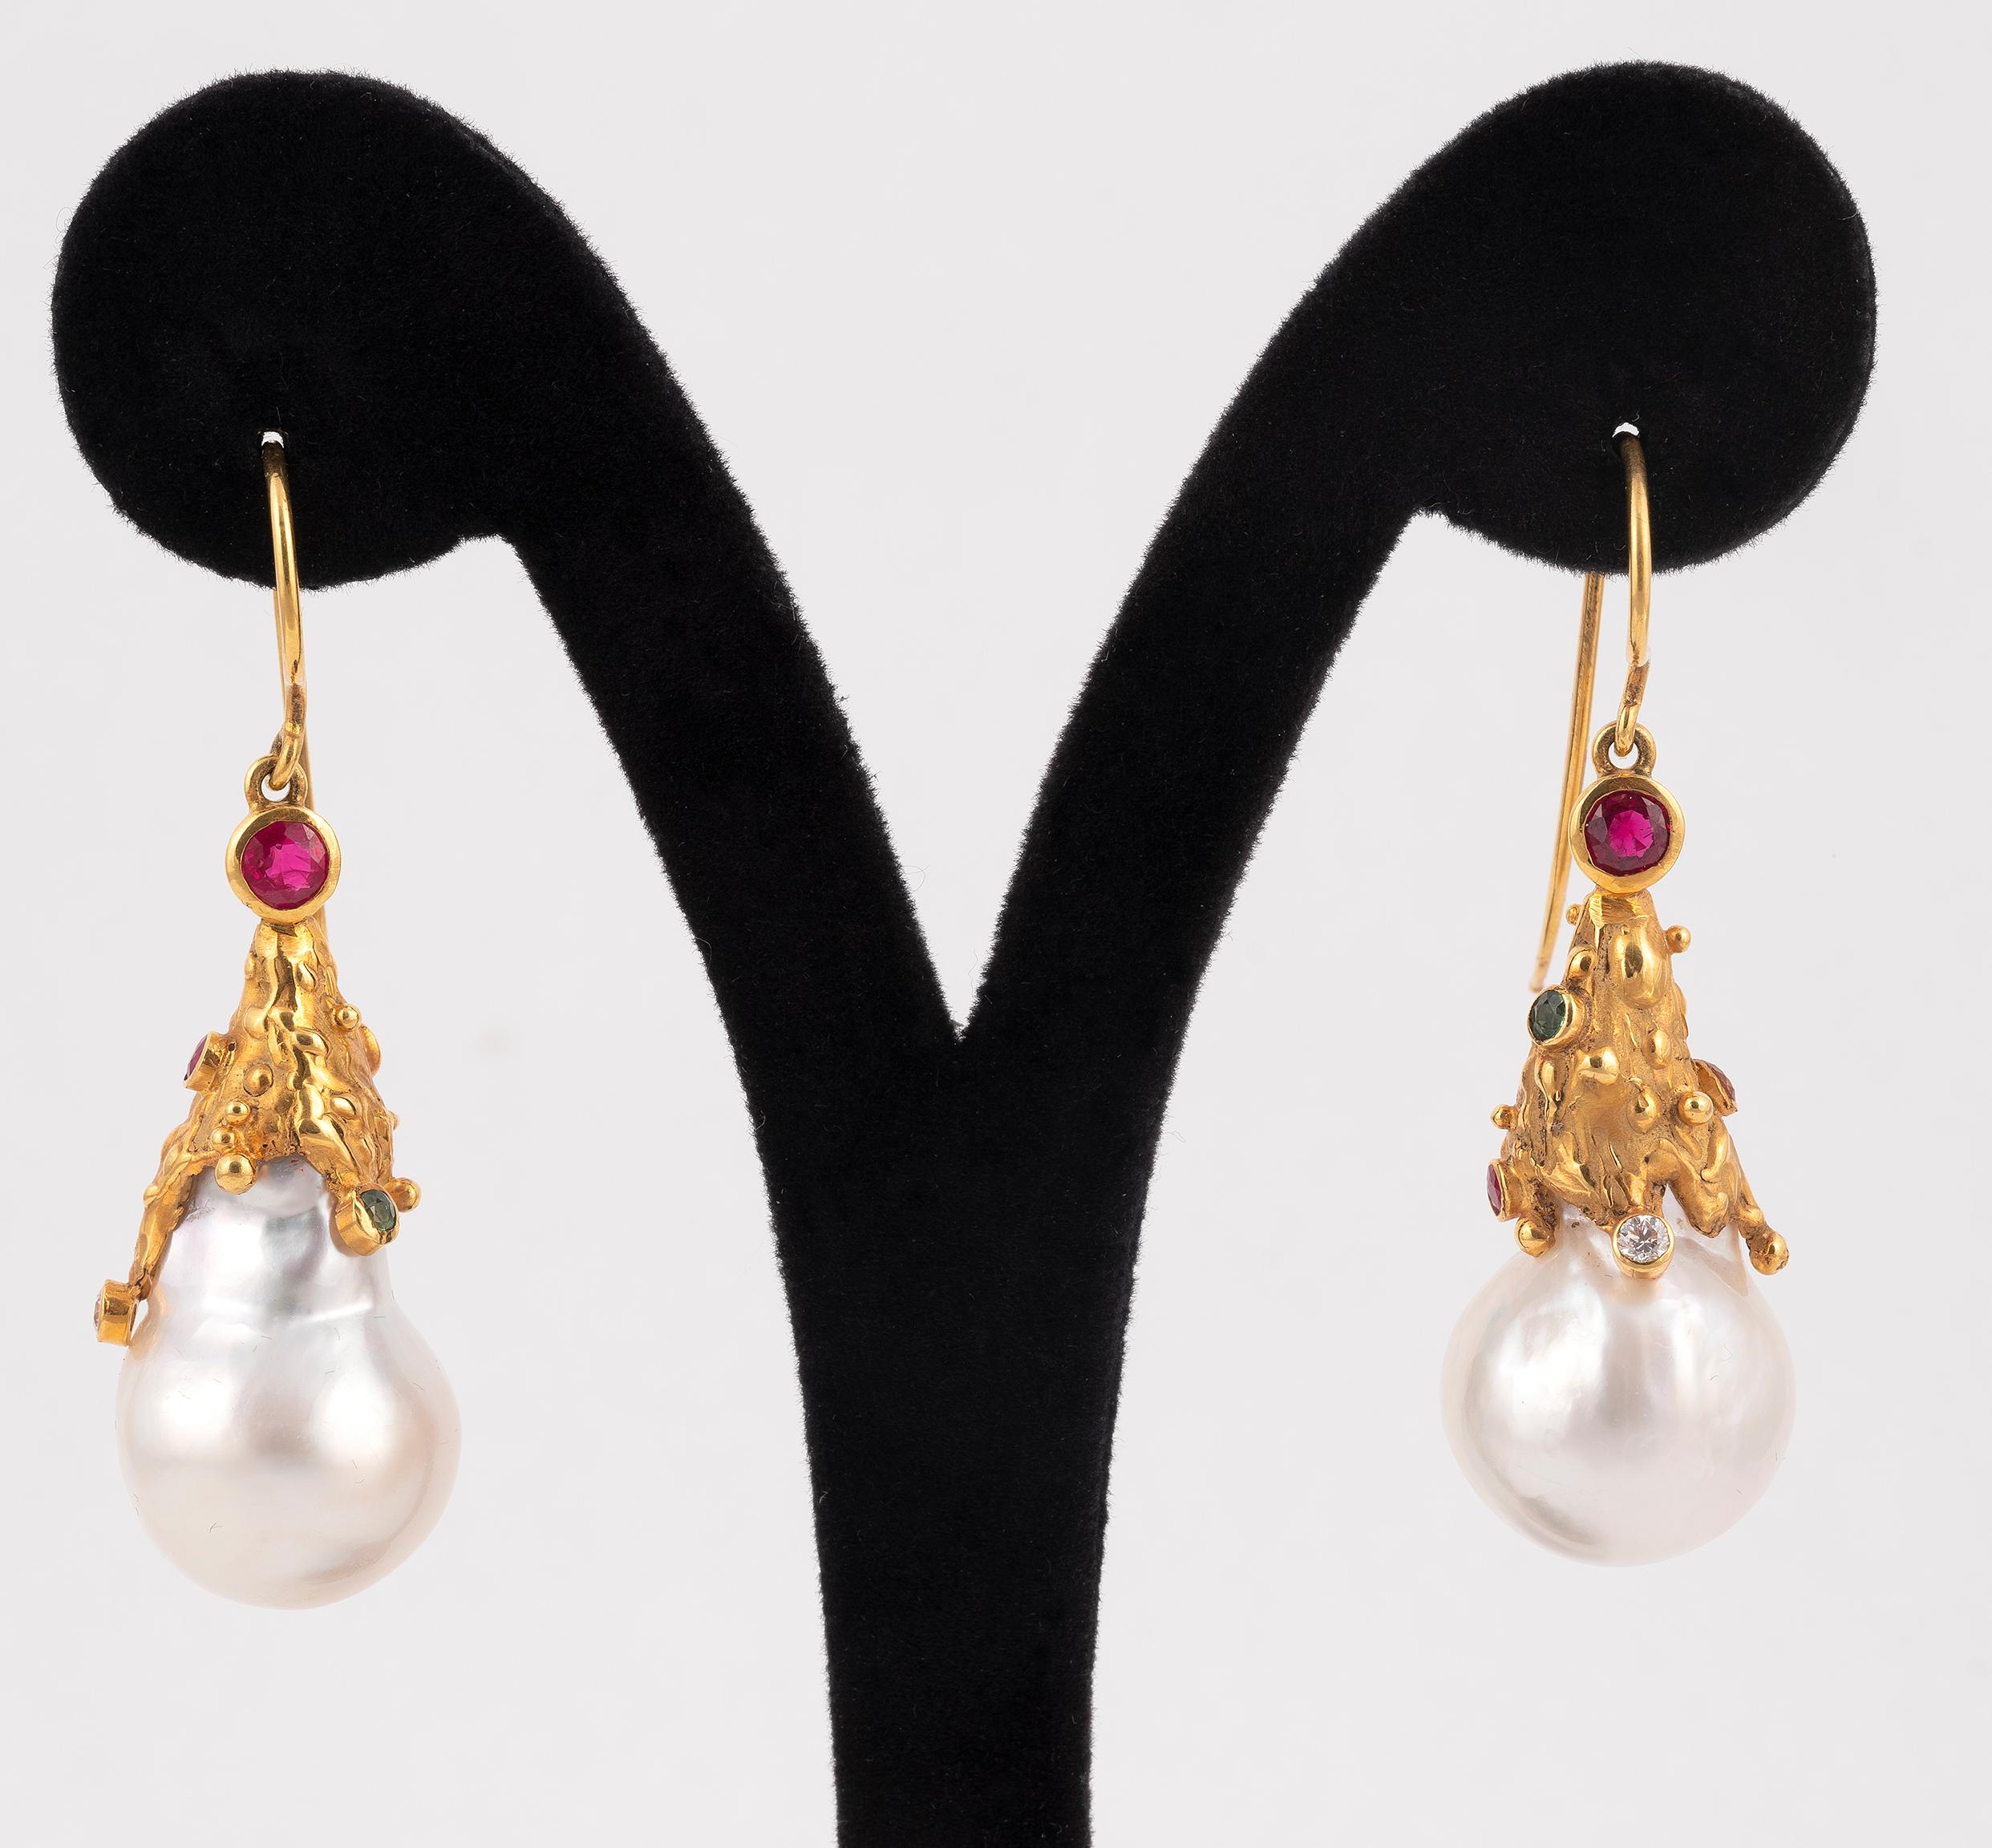 

The baroque pearl is 15mm and the earrings long 5cm